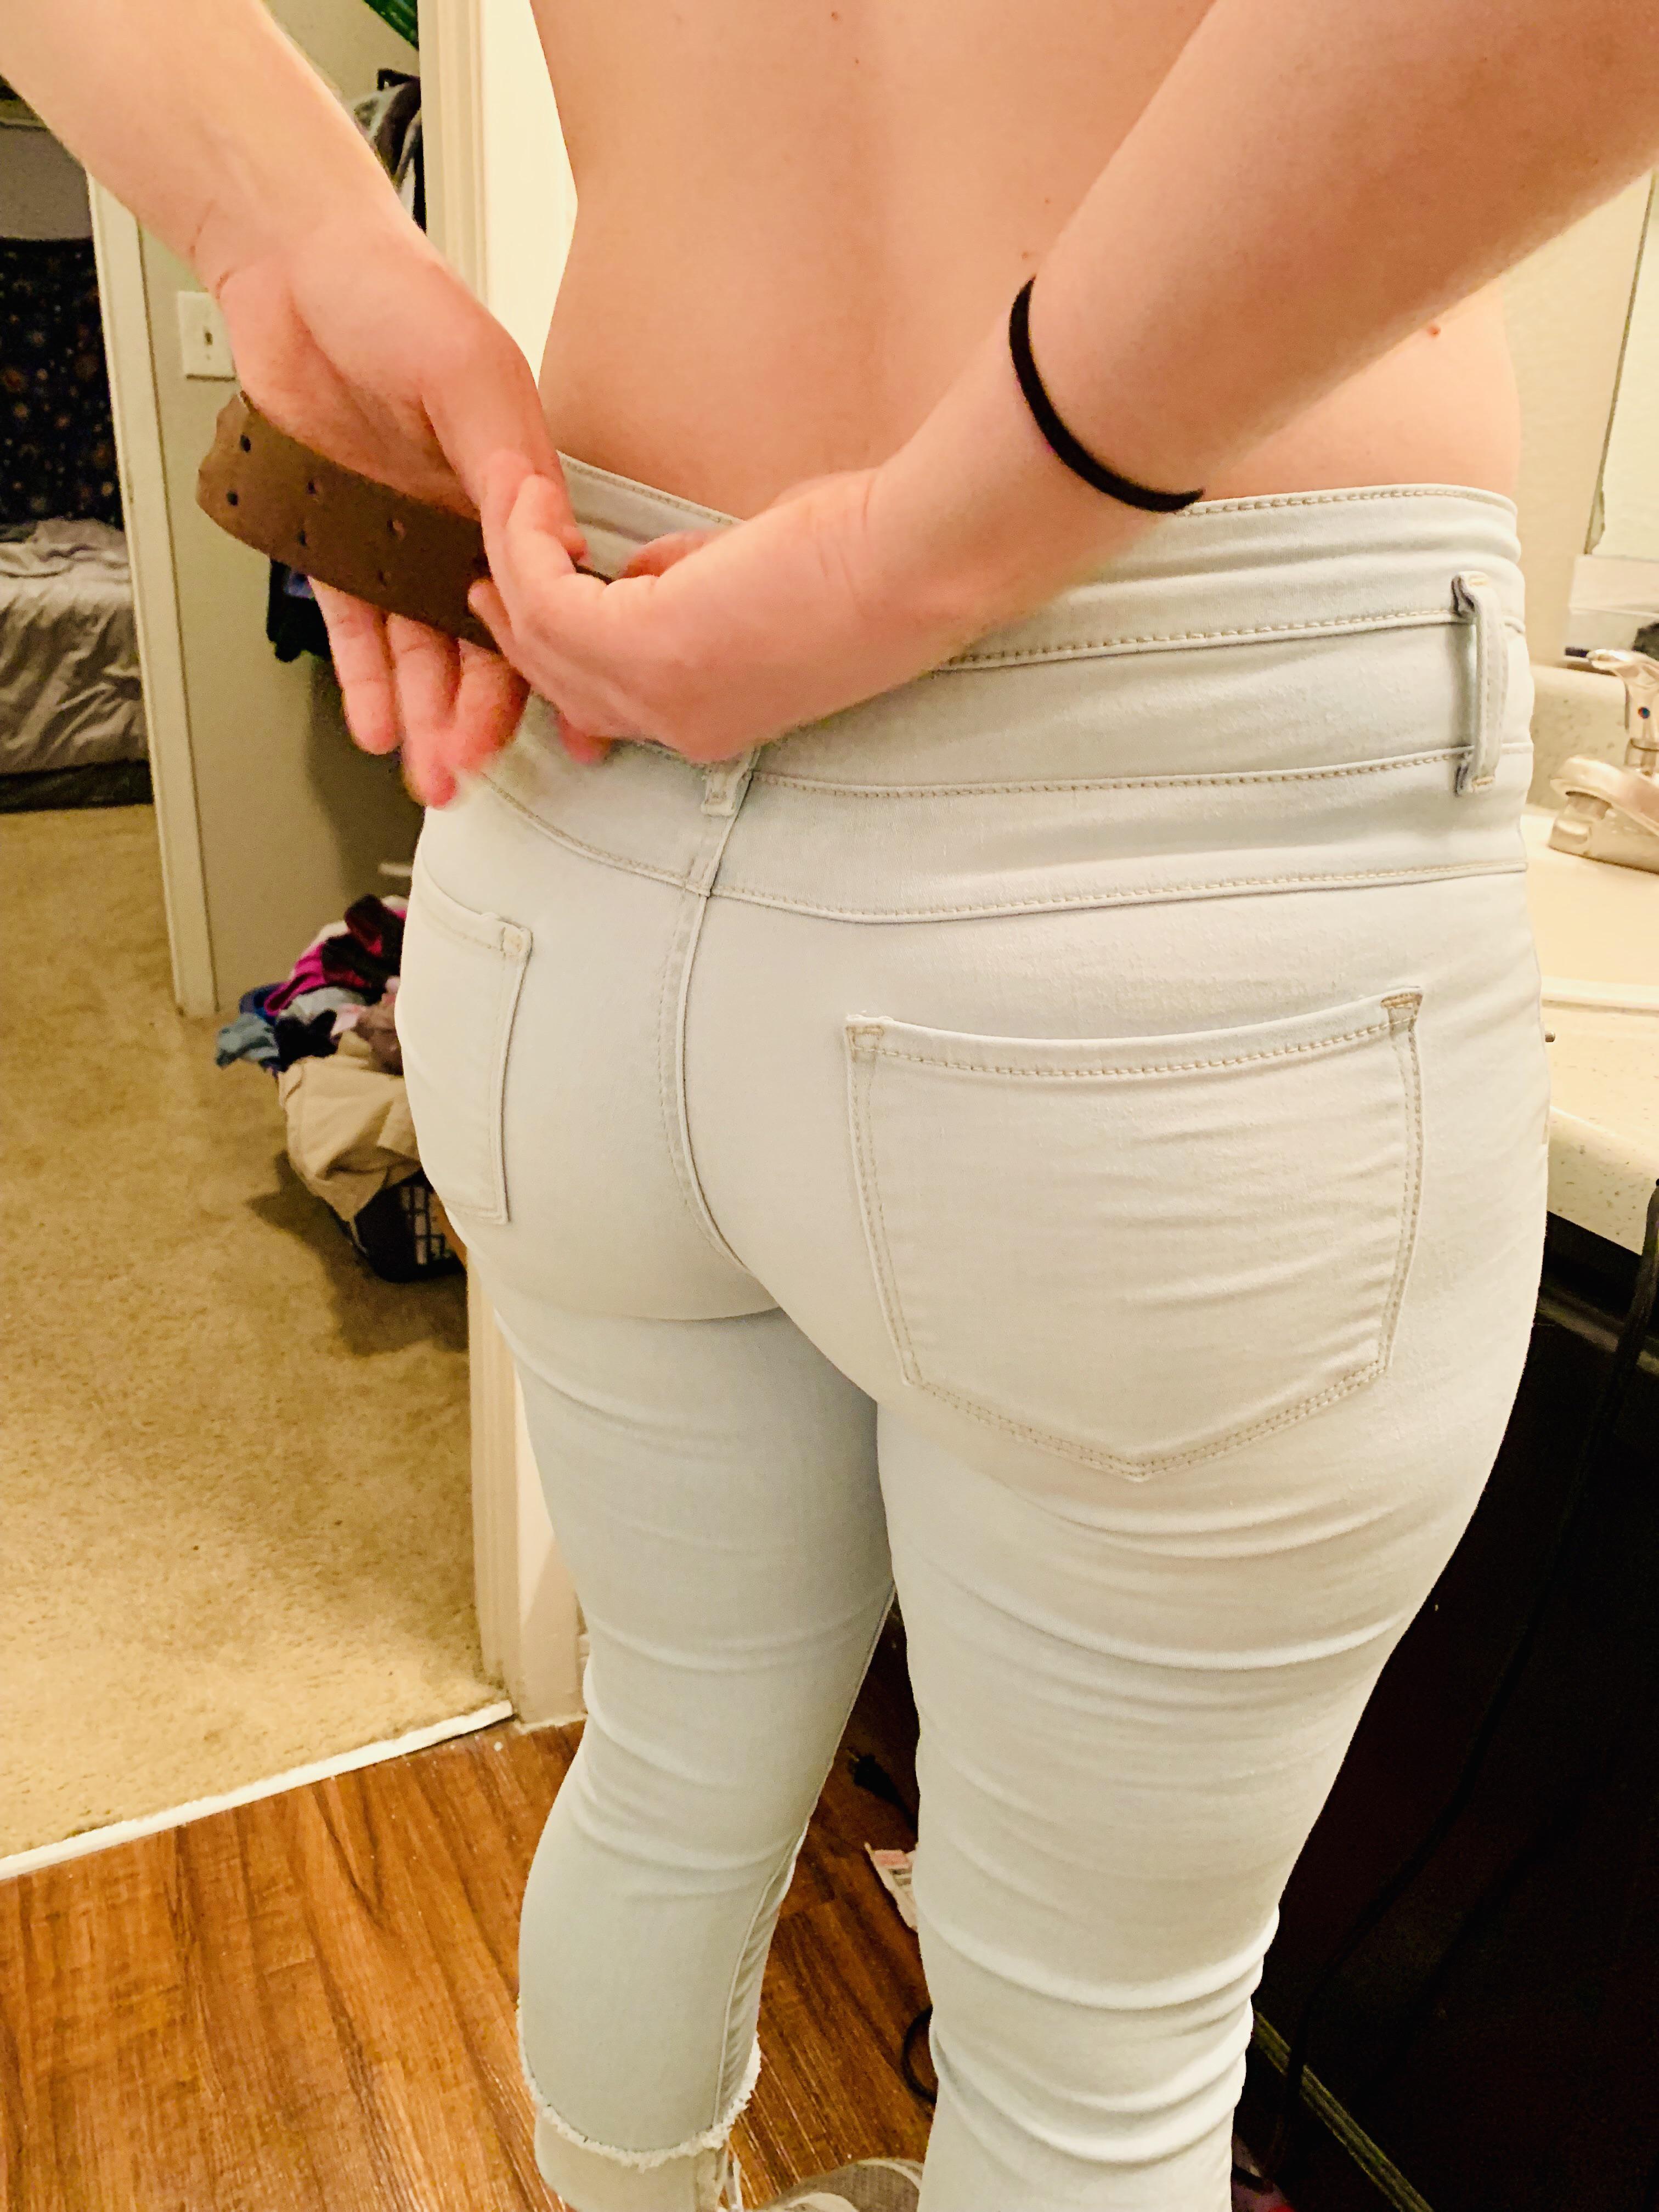 Do you guys love my hotwife in jeans as much as I do?